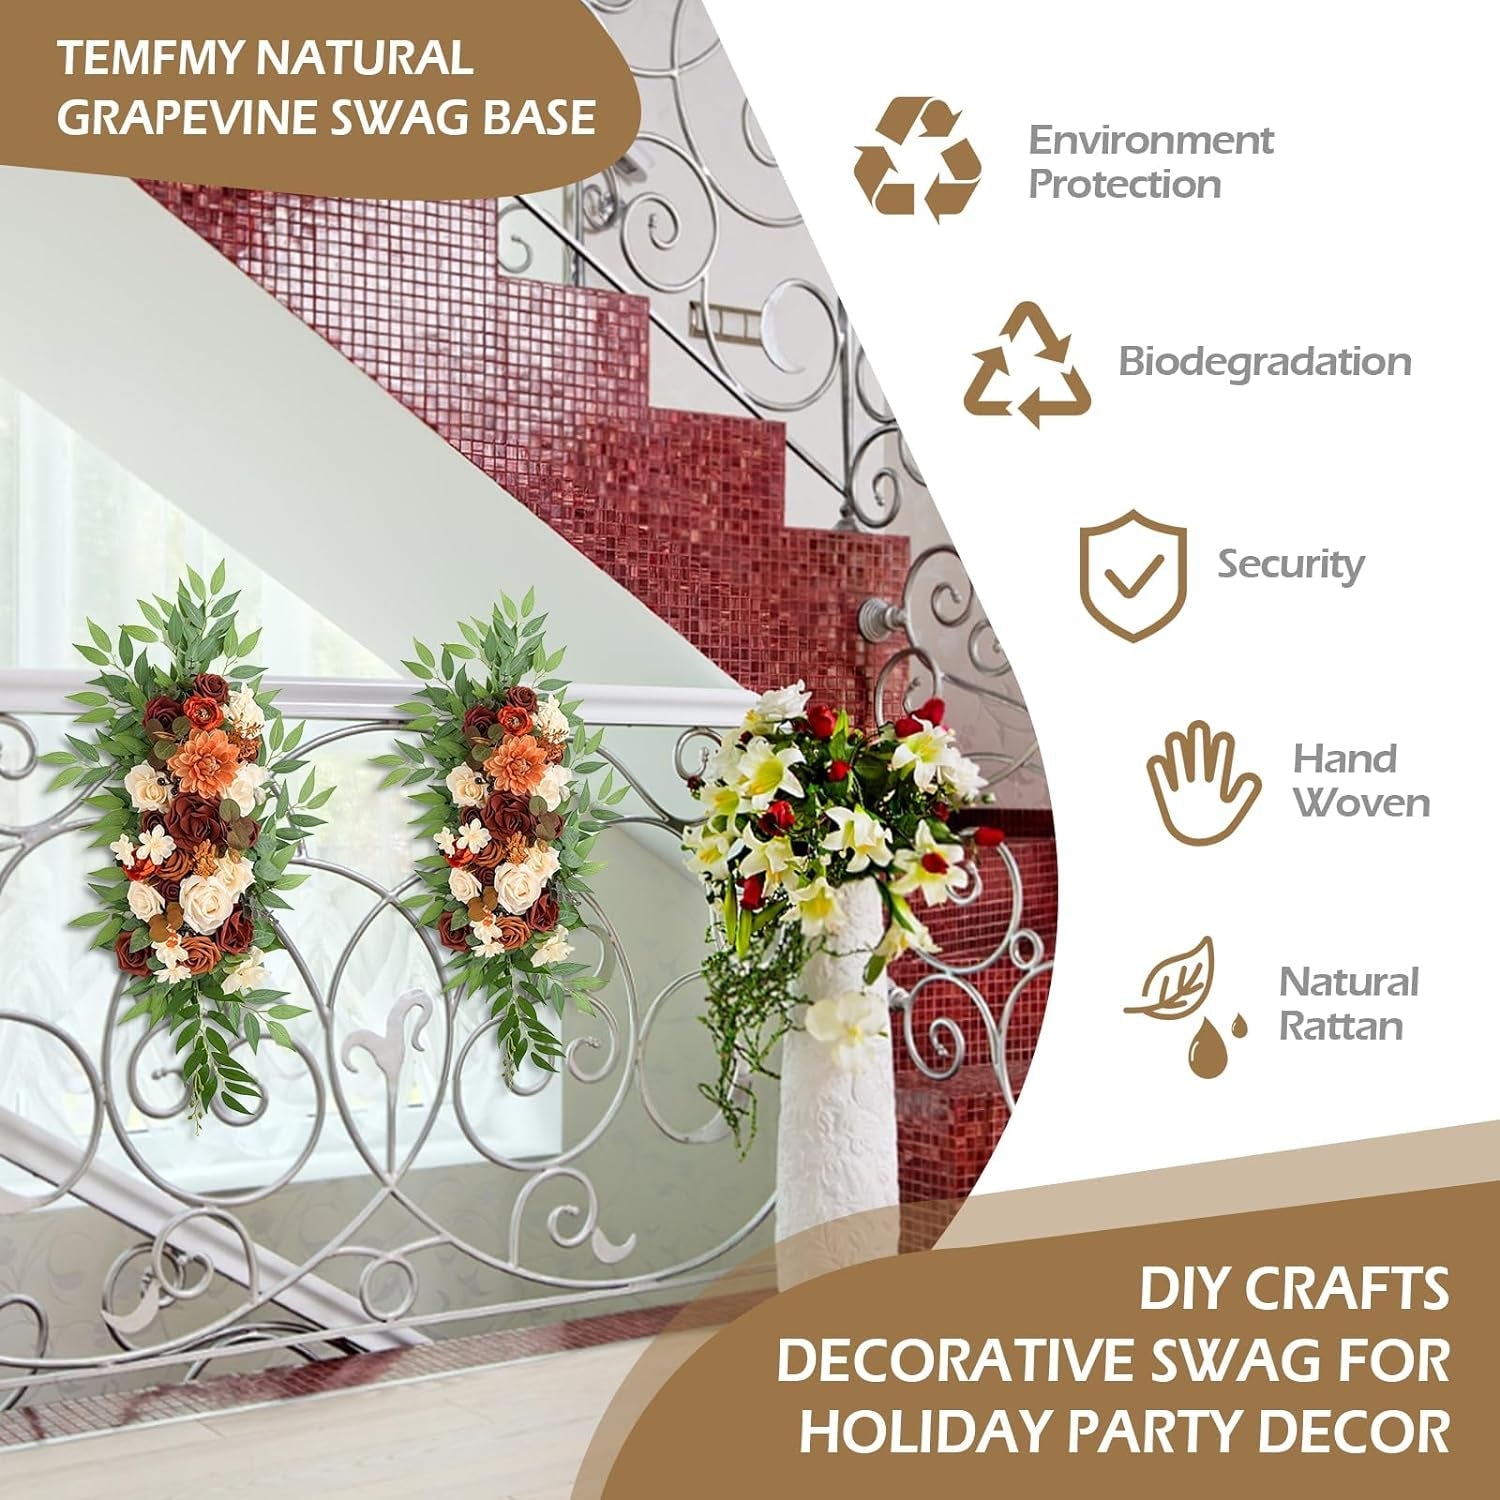 Natural Grapevine Swag Base, 6 PCS, DIY Crafts Decorative Swag for Holiday Party Decor